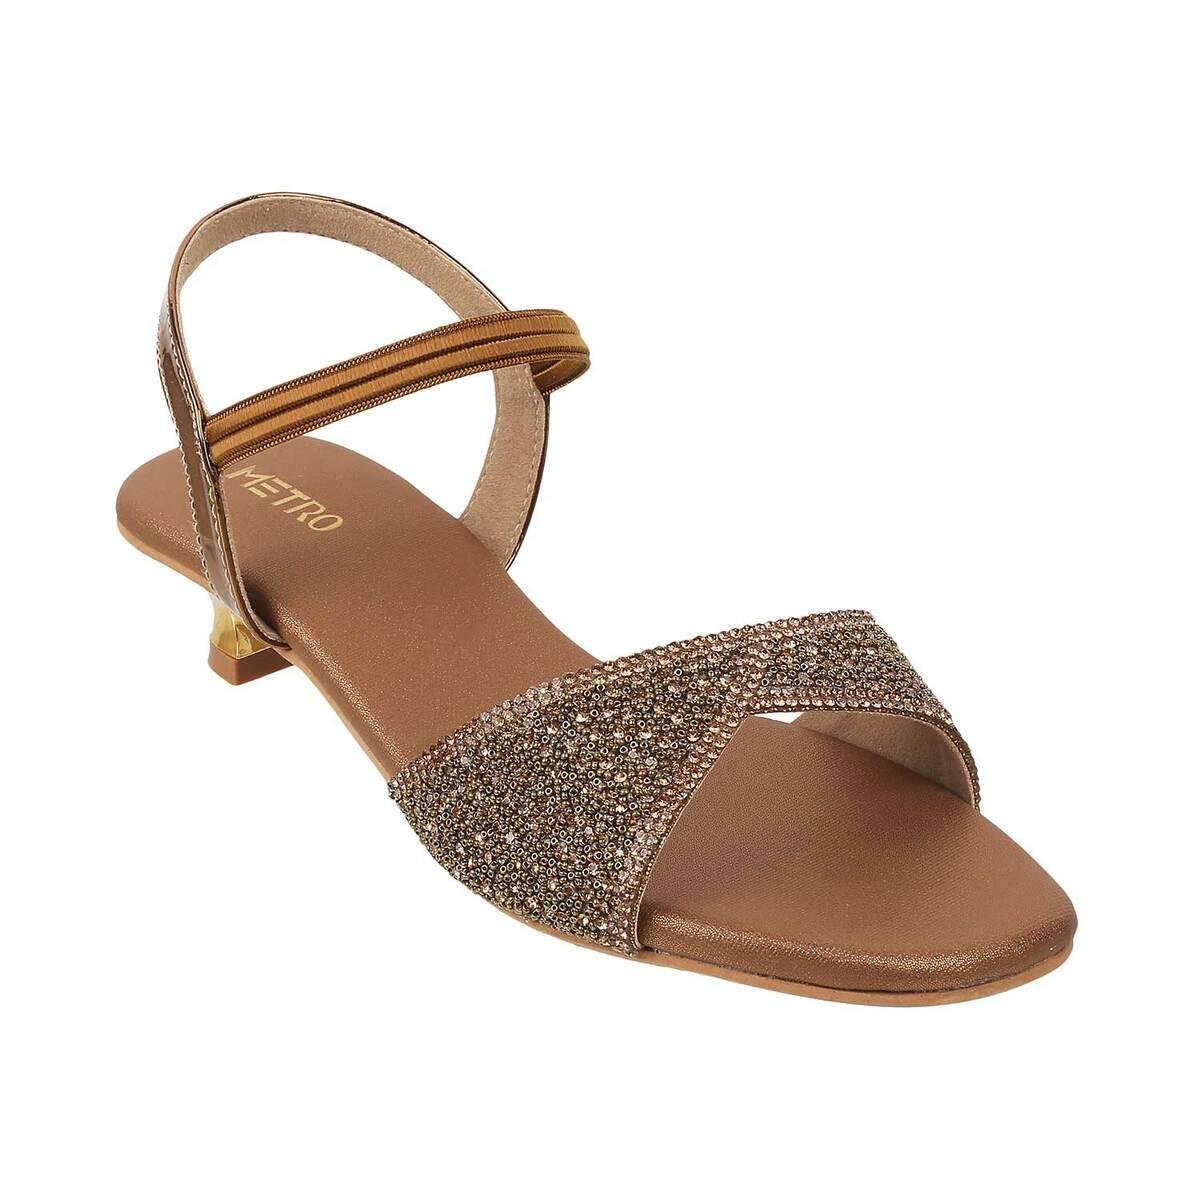 Buy online Girls Gold Leather Sandal from sandals & floaters for